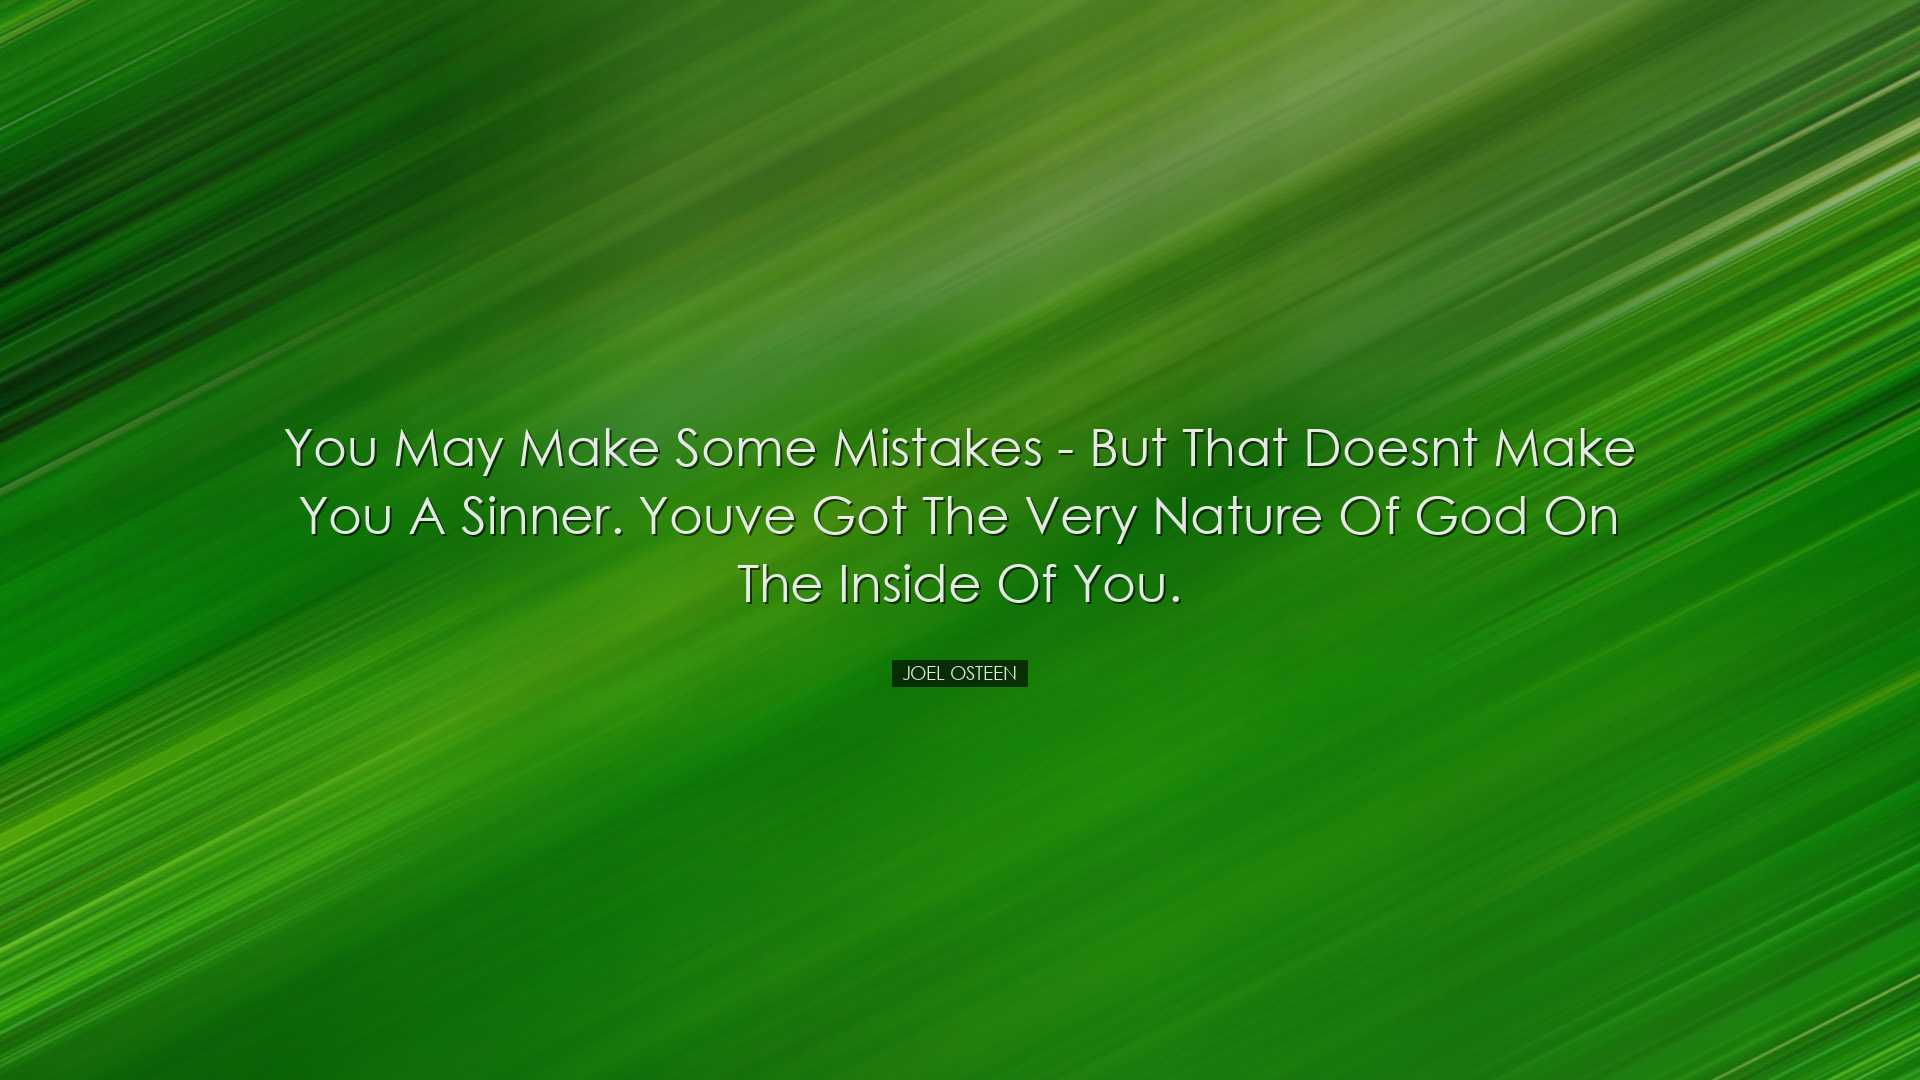 You may make some mistakes - but that doesnt make you a sinner. Yo